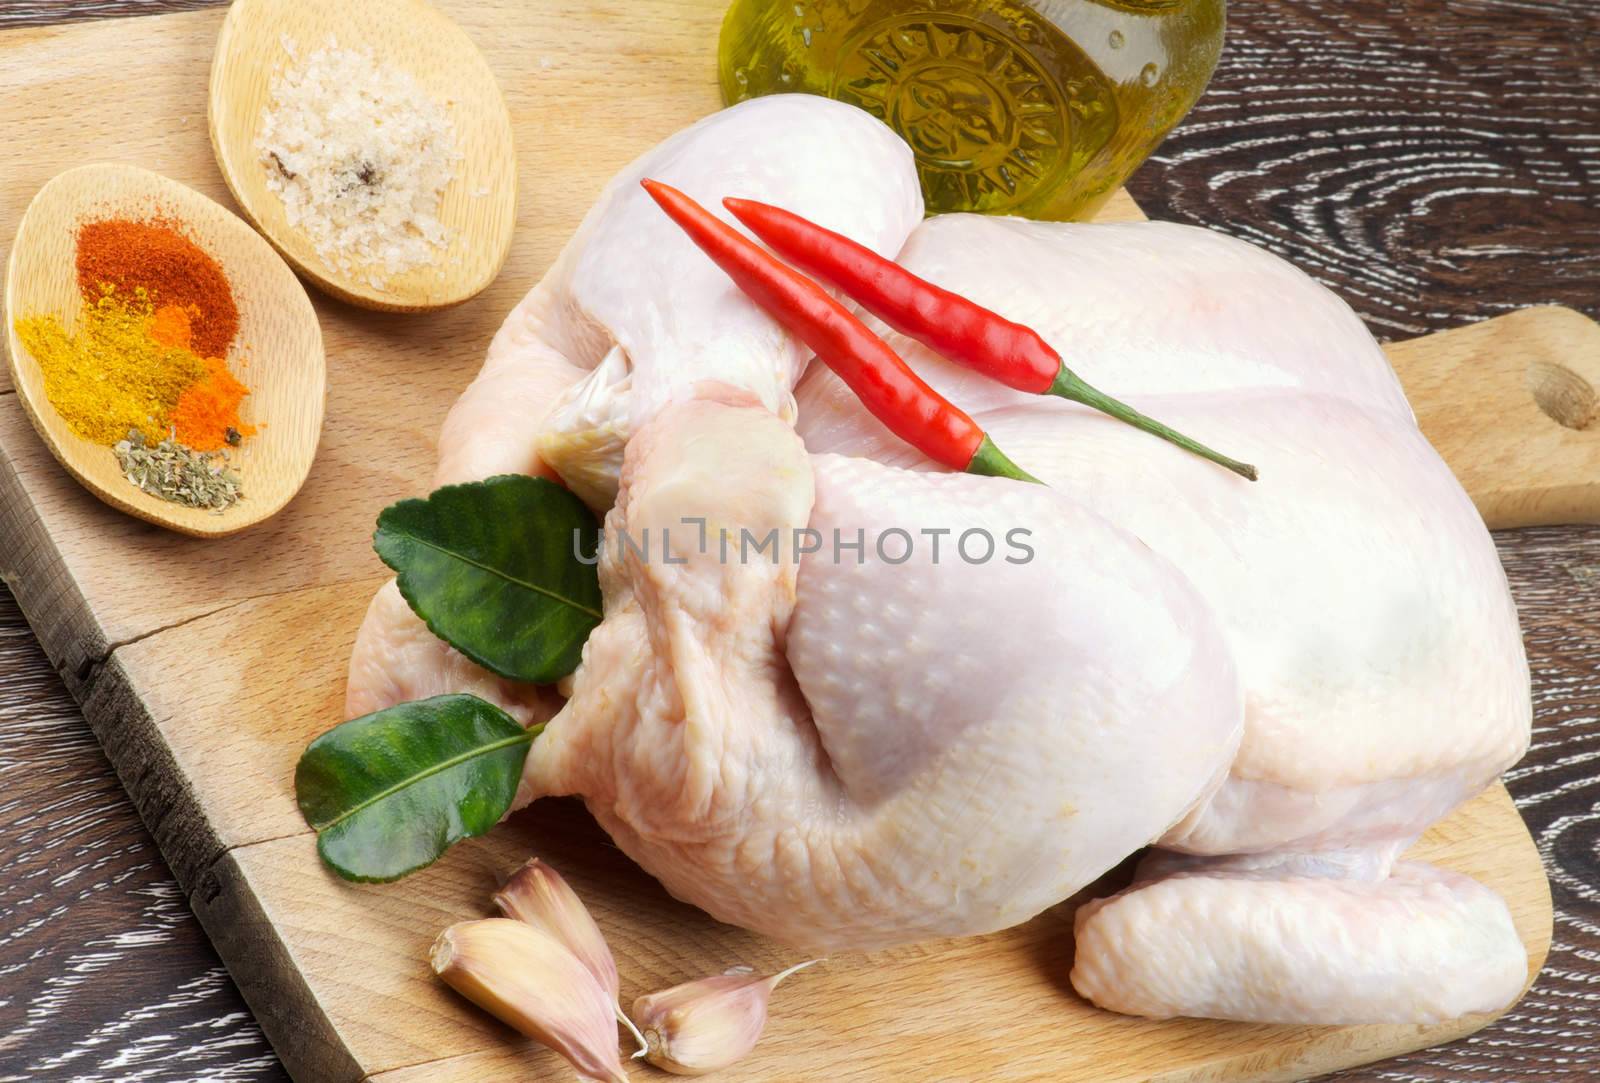 Perfect Raw Chicken Full Body Trussed and Ready to Roast with Chili Peppers, Hot Crushed Spices, Garlic, Curry Leaves and Olive Oil closeup on Wooden Cutting Board